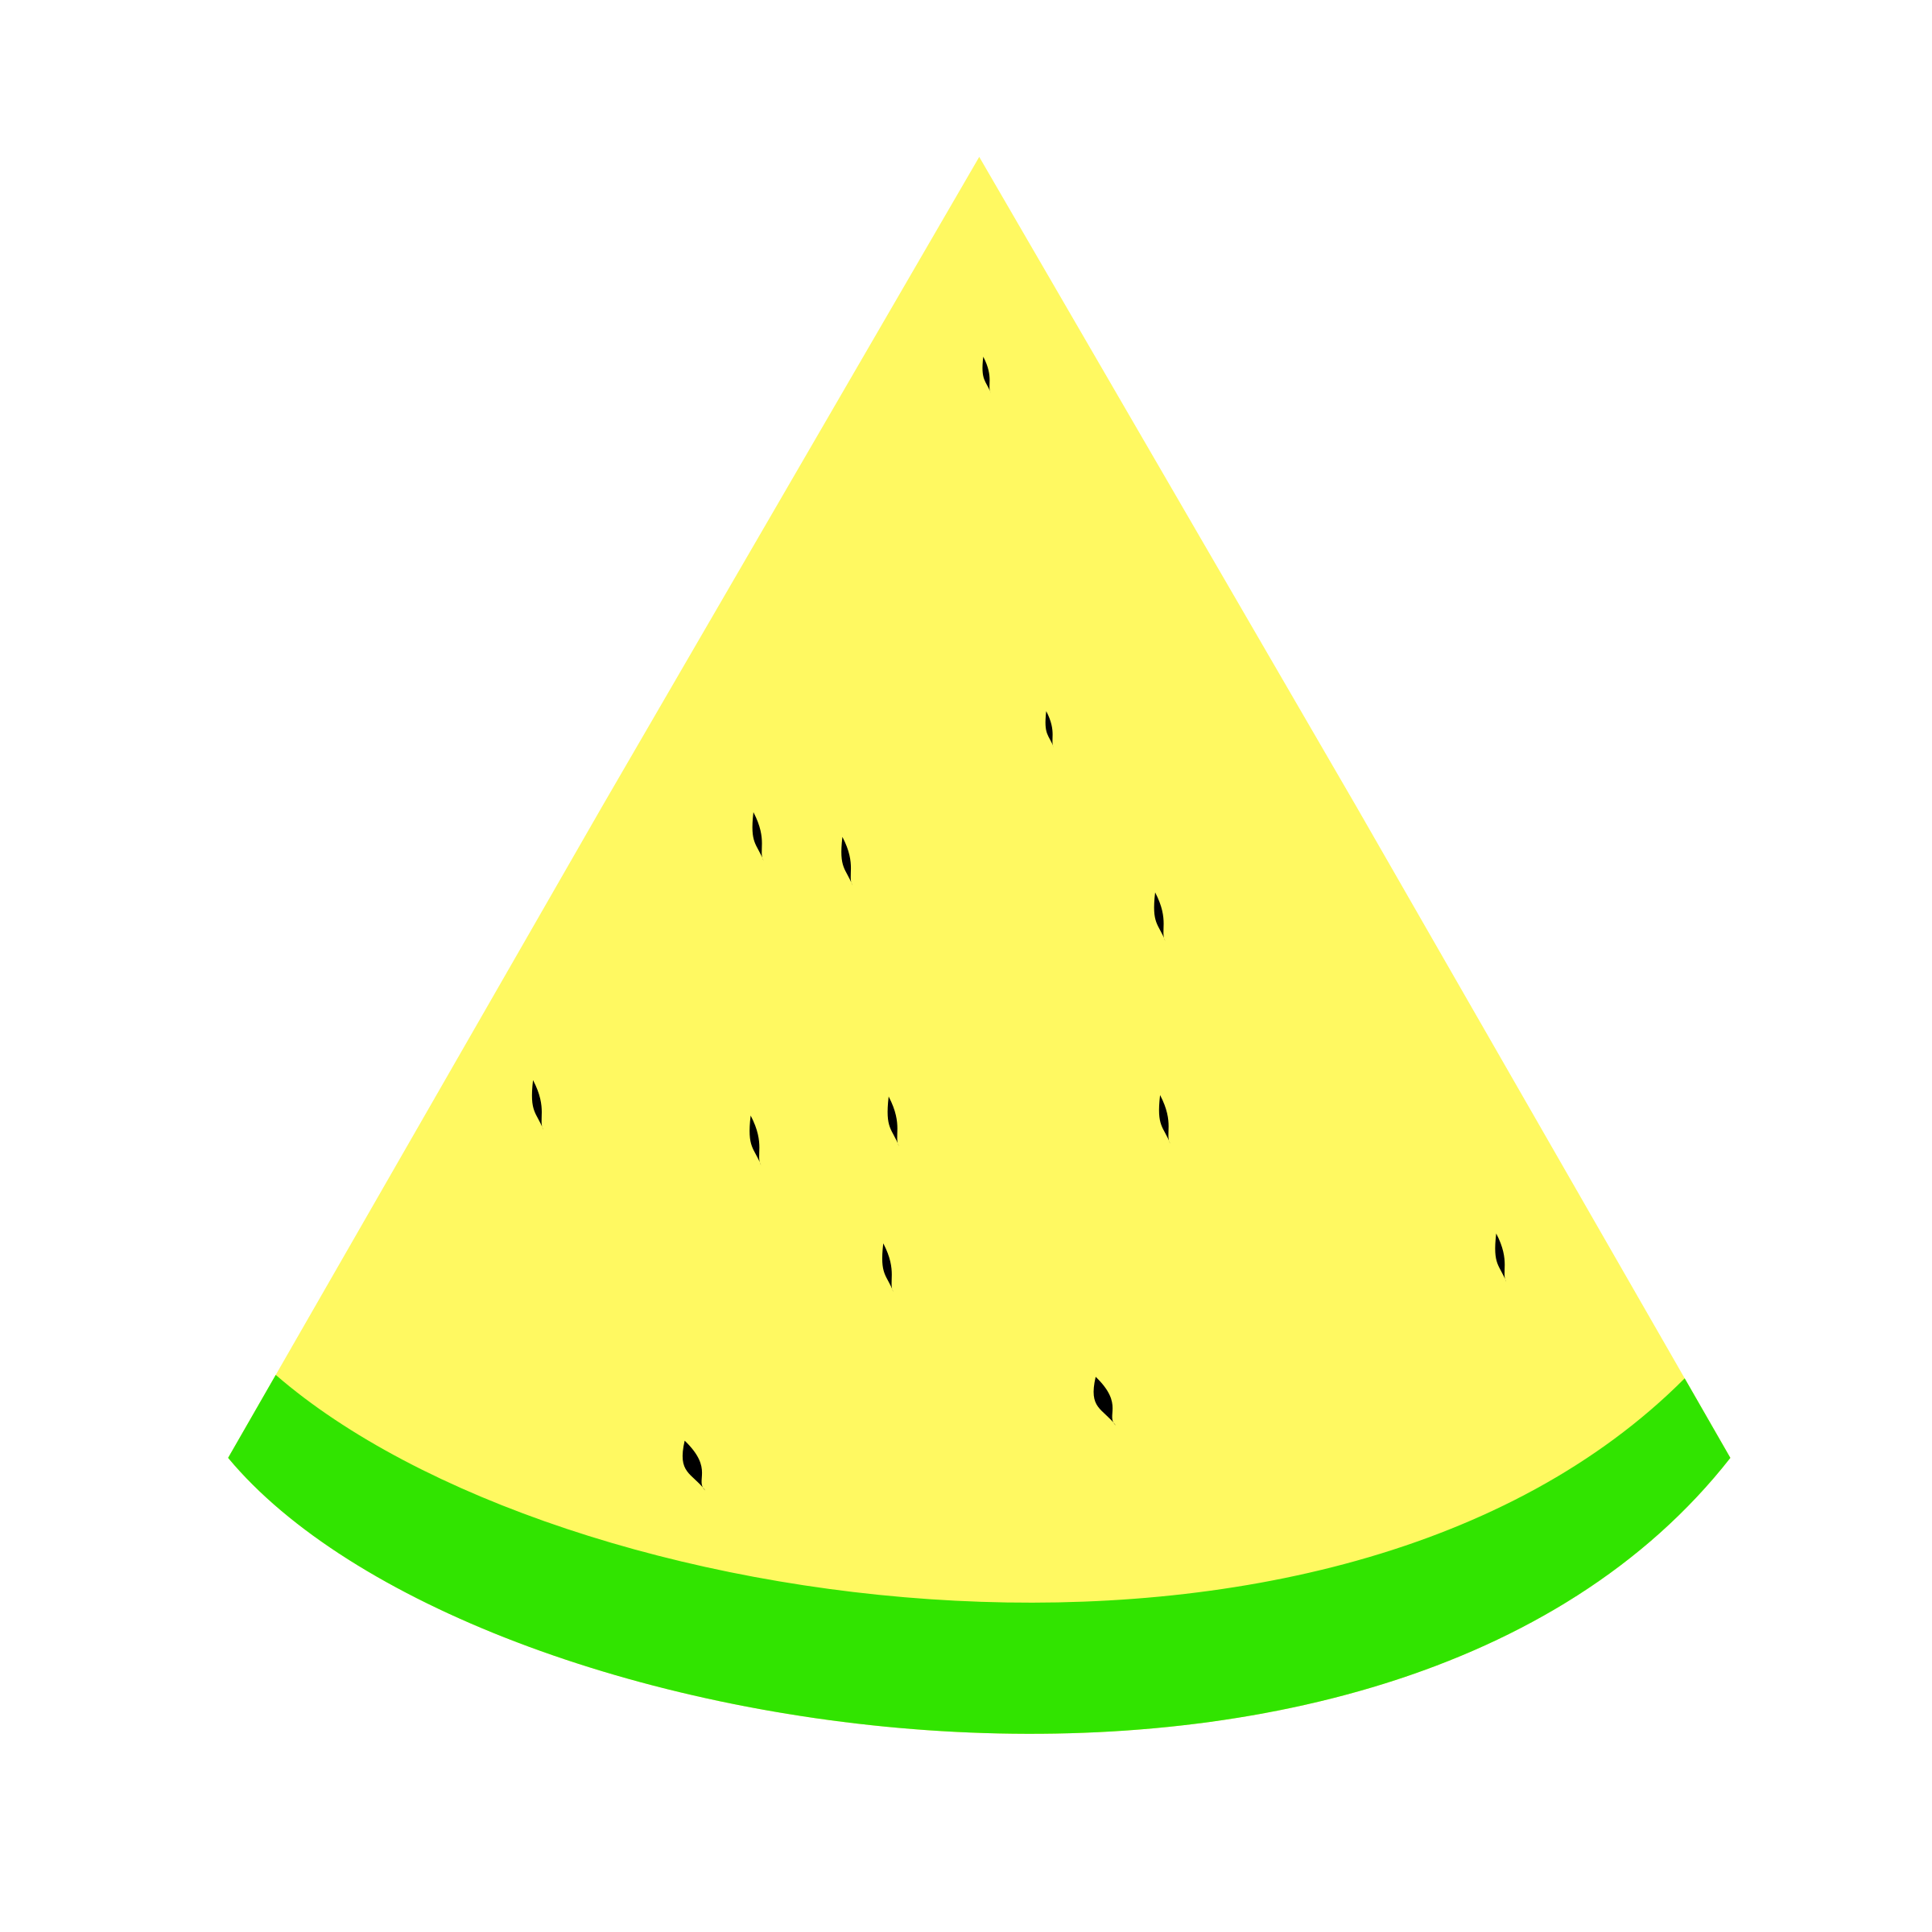 watermelon clipart triangle thing